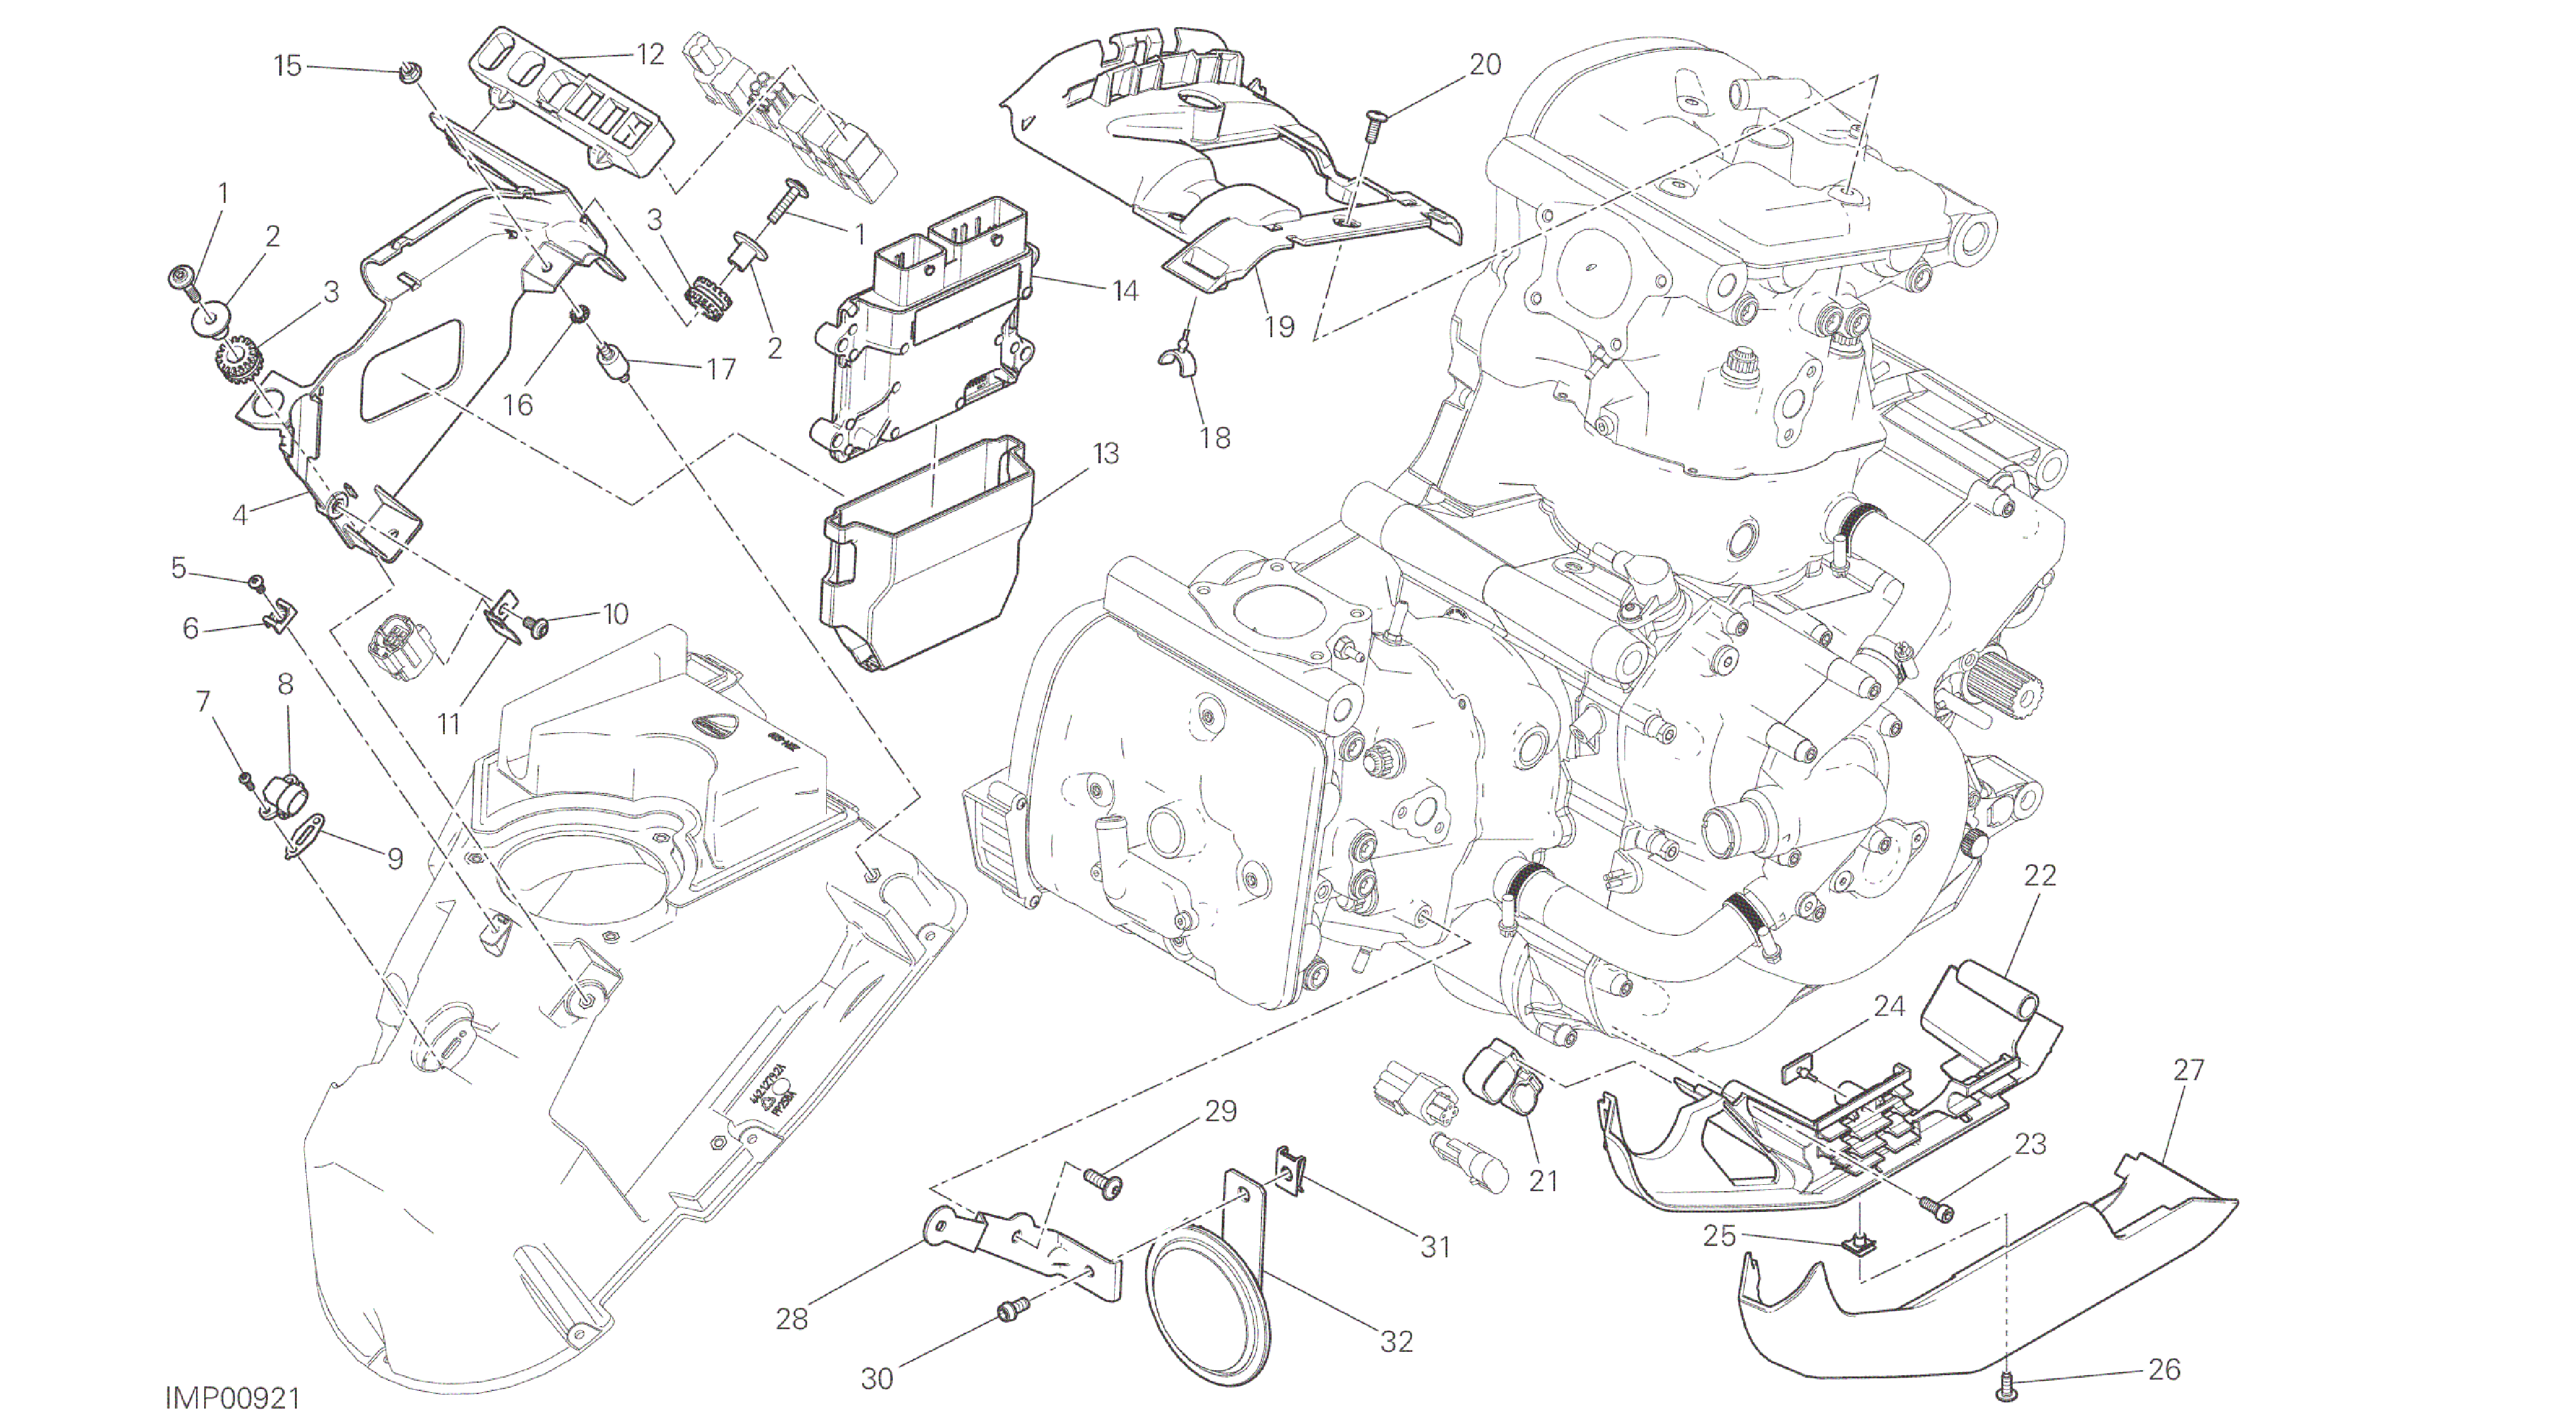 DRAWING 18A - ENGINE CONTROL UNIT [MOD:M 821]GROUP ELECTRIC